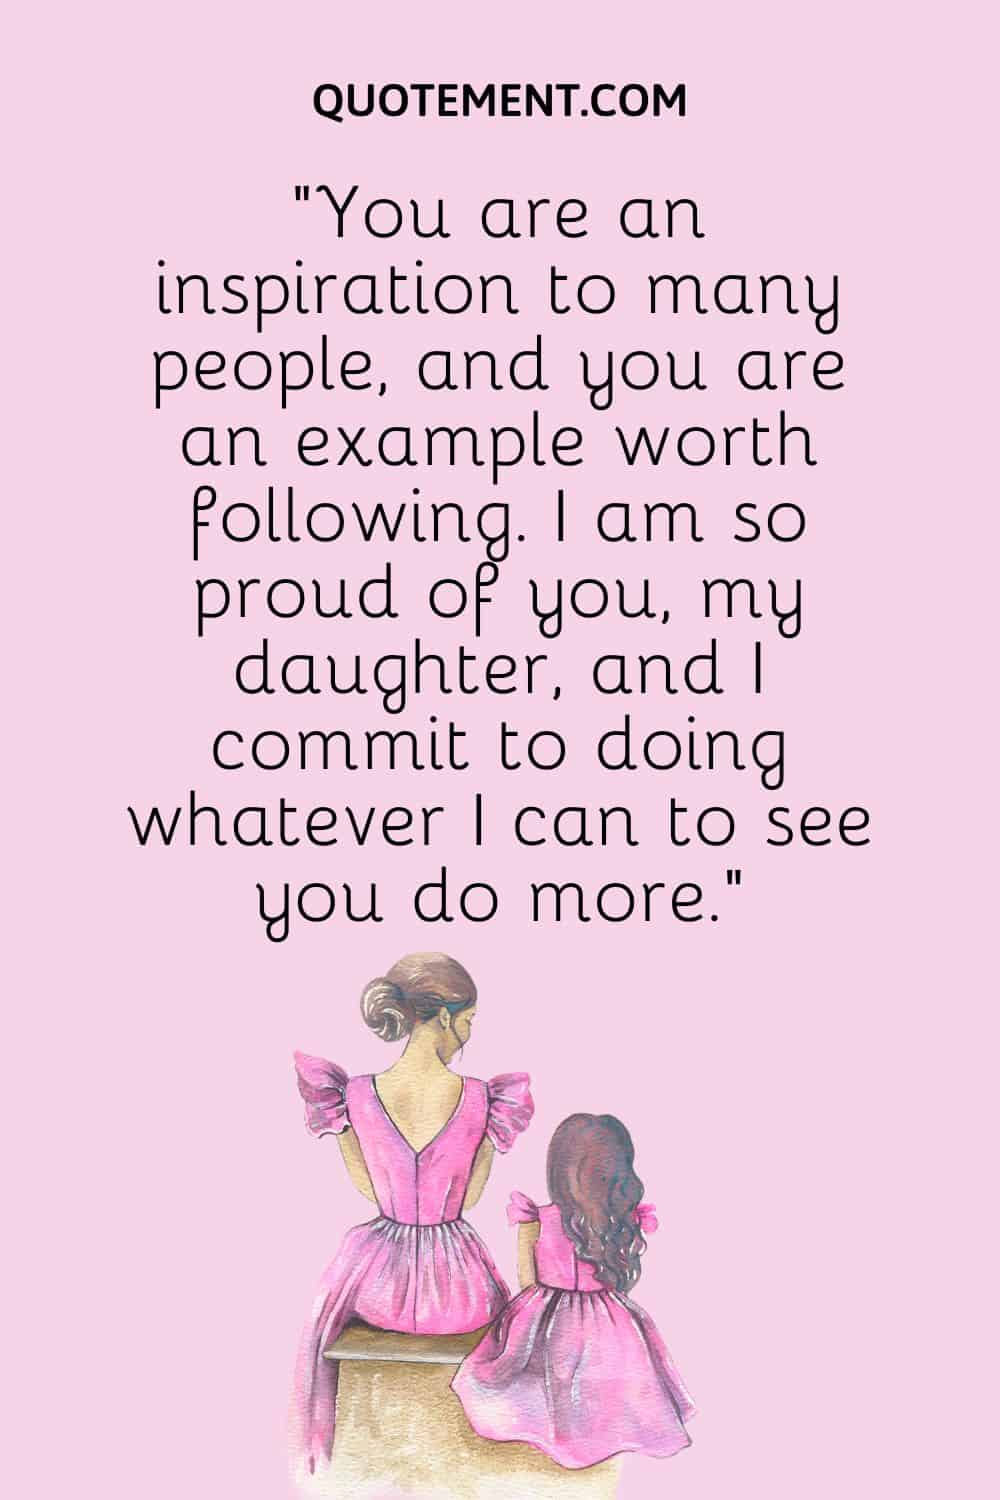 “You are an inspiration to many people, and you are an example worth following. I am so proud of you, my daughter, and I commit to doing whatever I can to see you do more.”